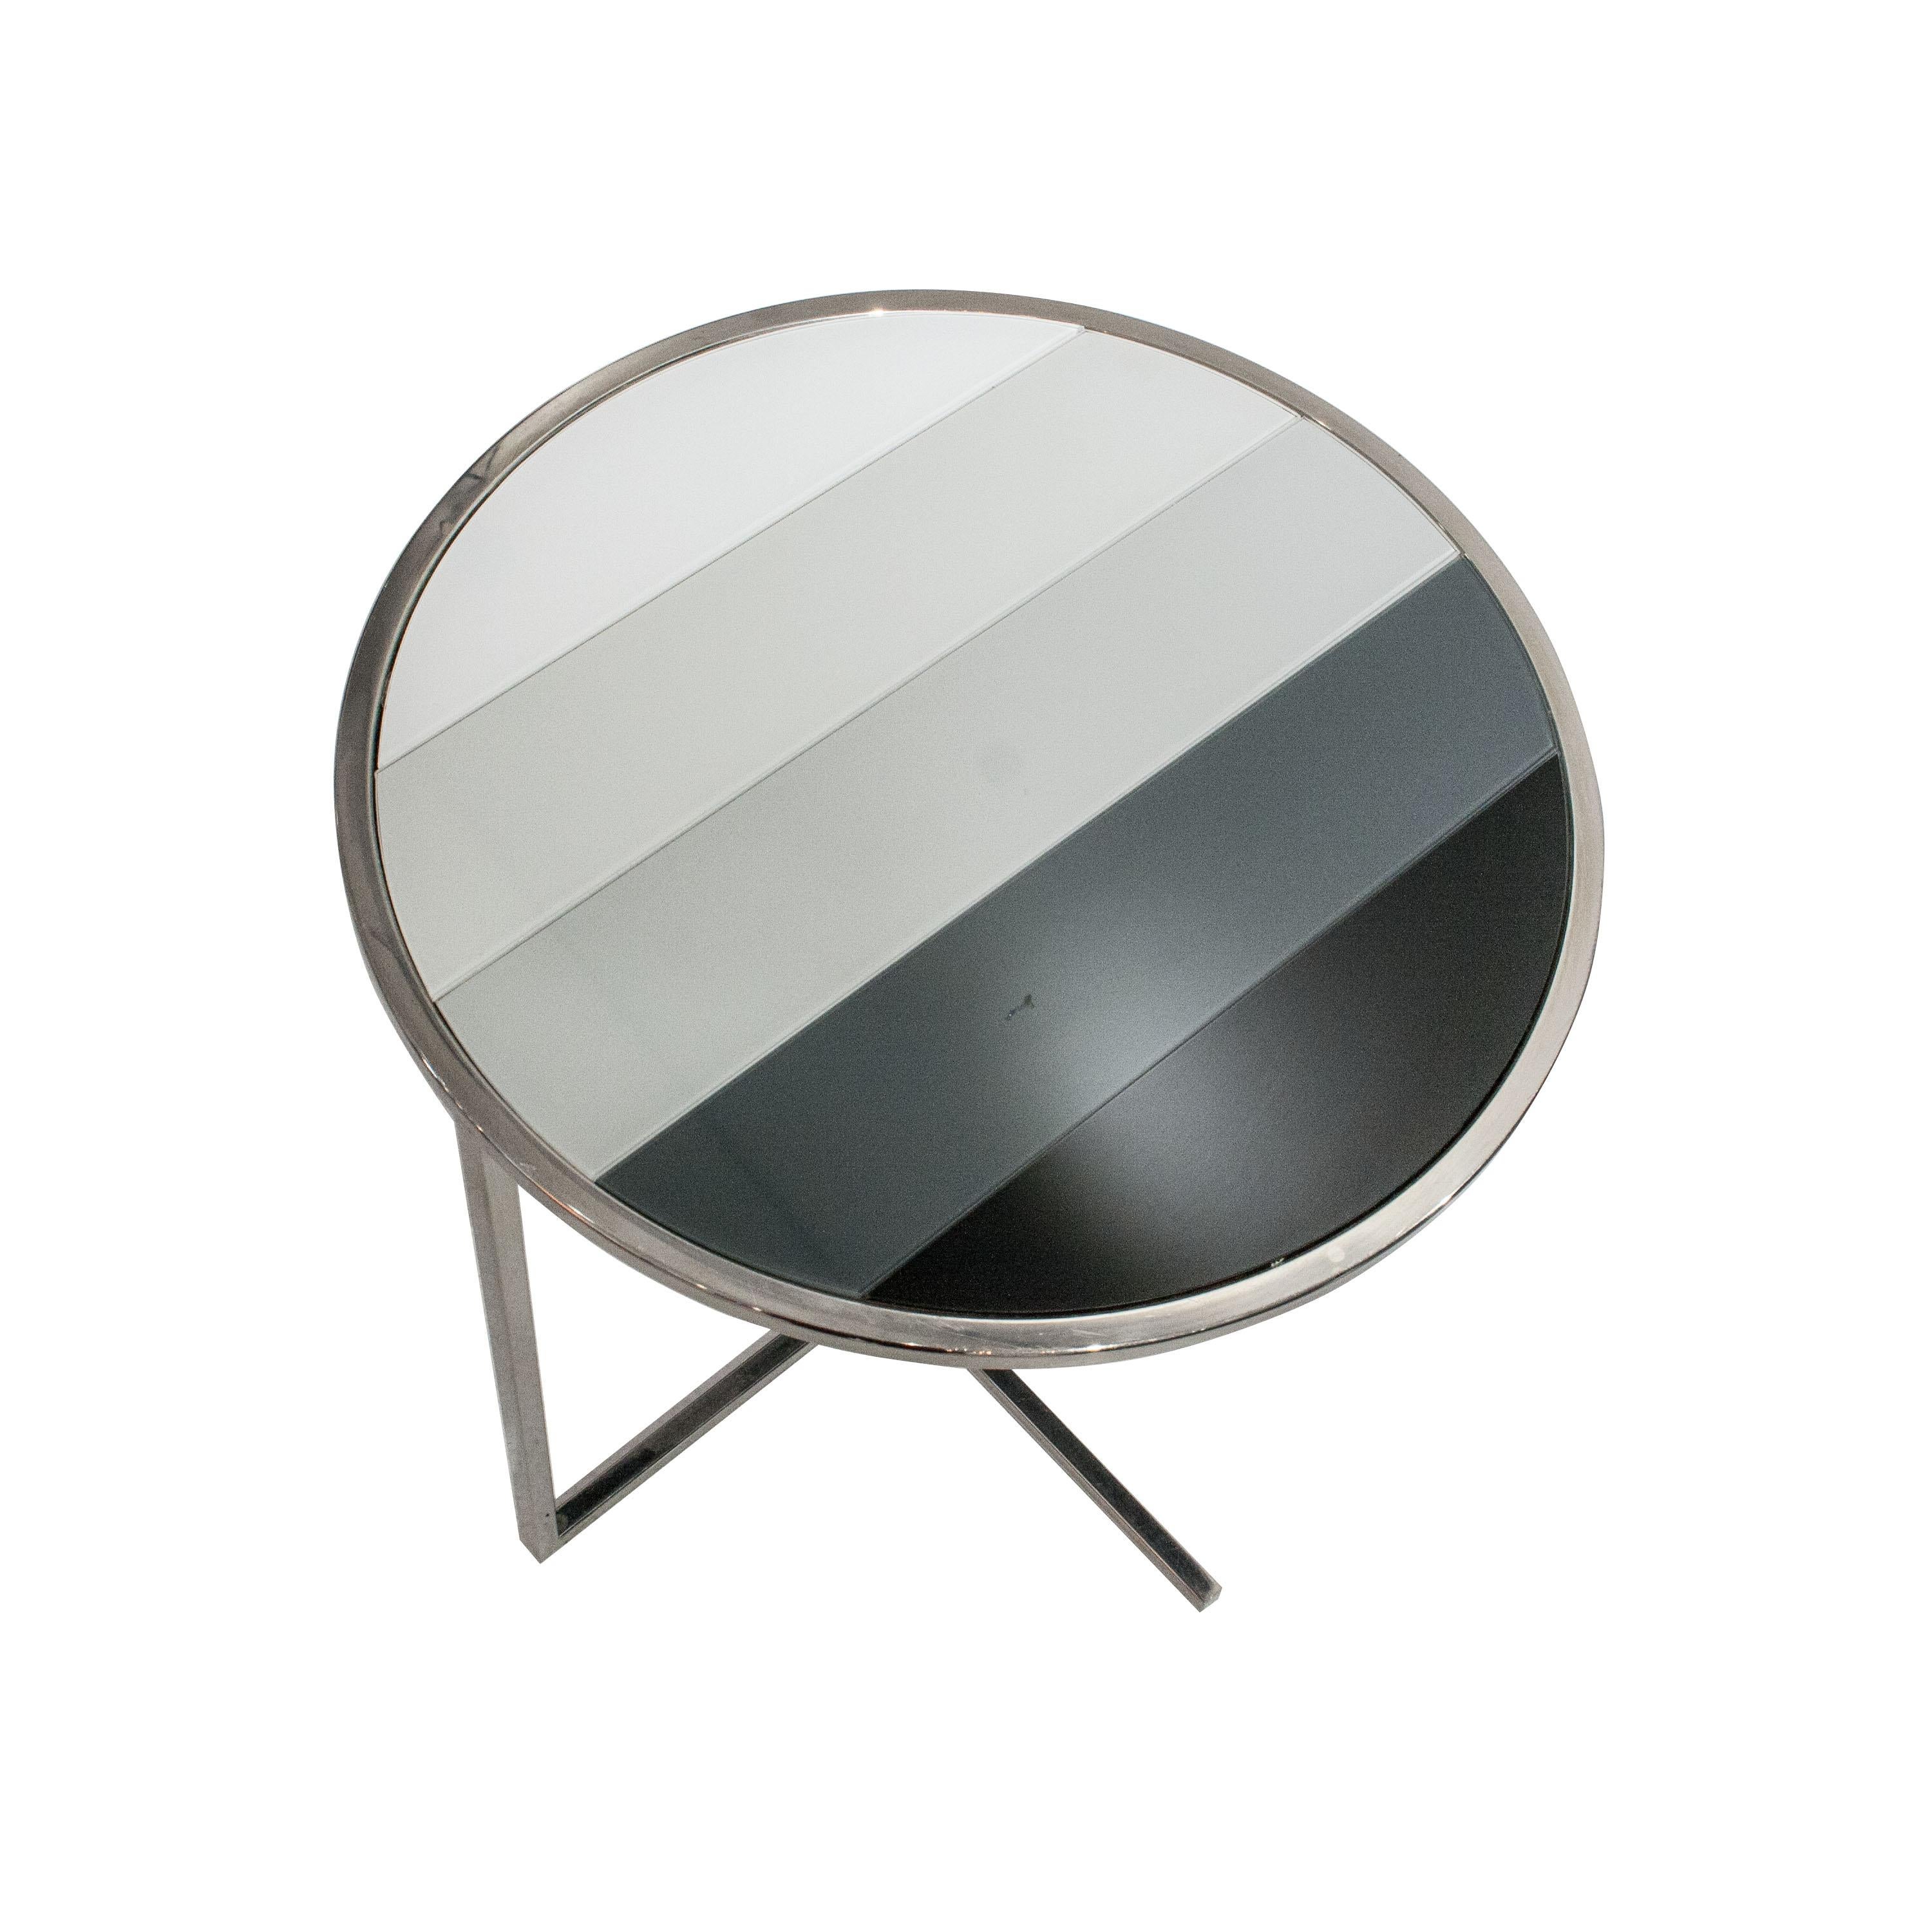 Side table made from an original Italian chromed steel structure from the 1970's and upgraded witn an actual glass top designed by IKB191 in white, black and shades of grey.


